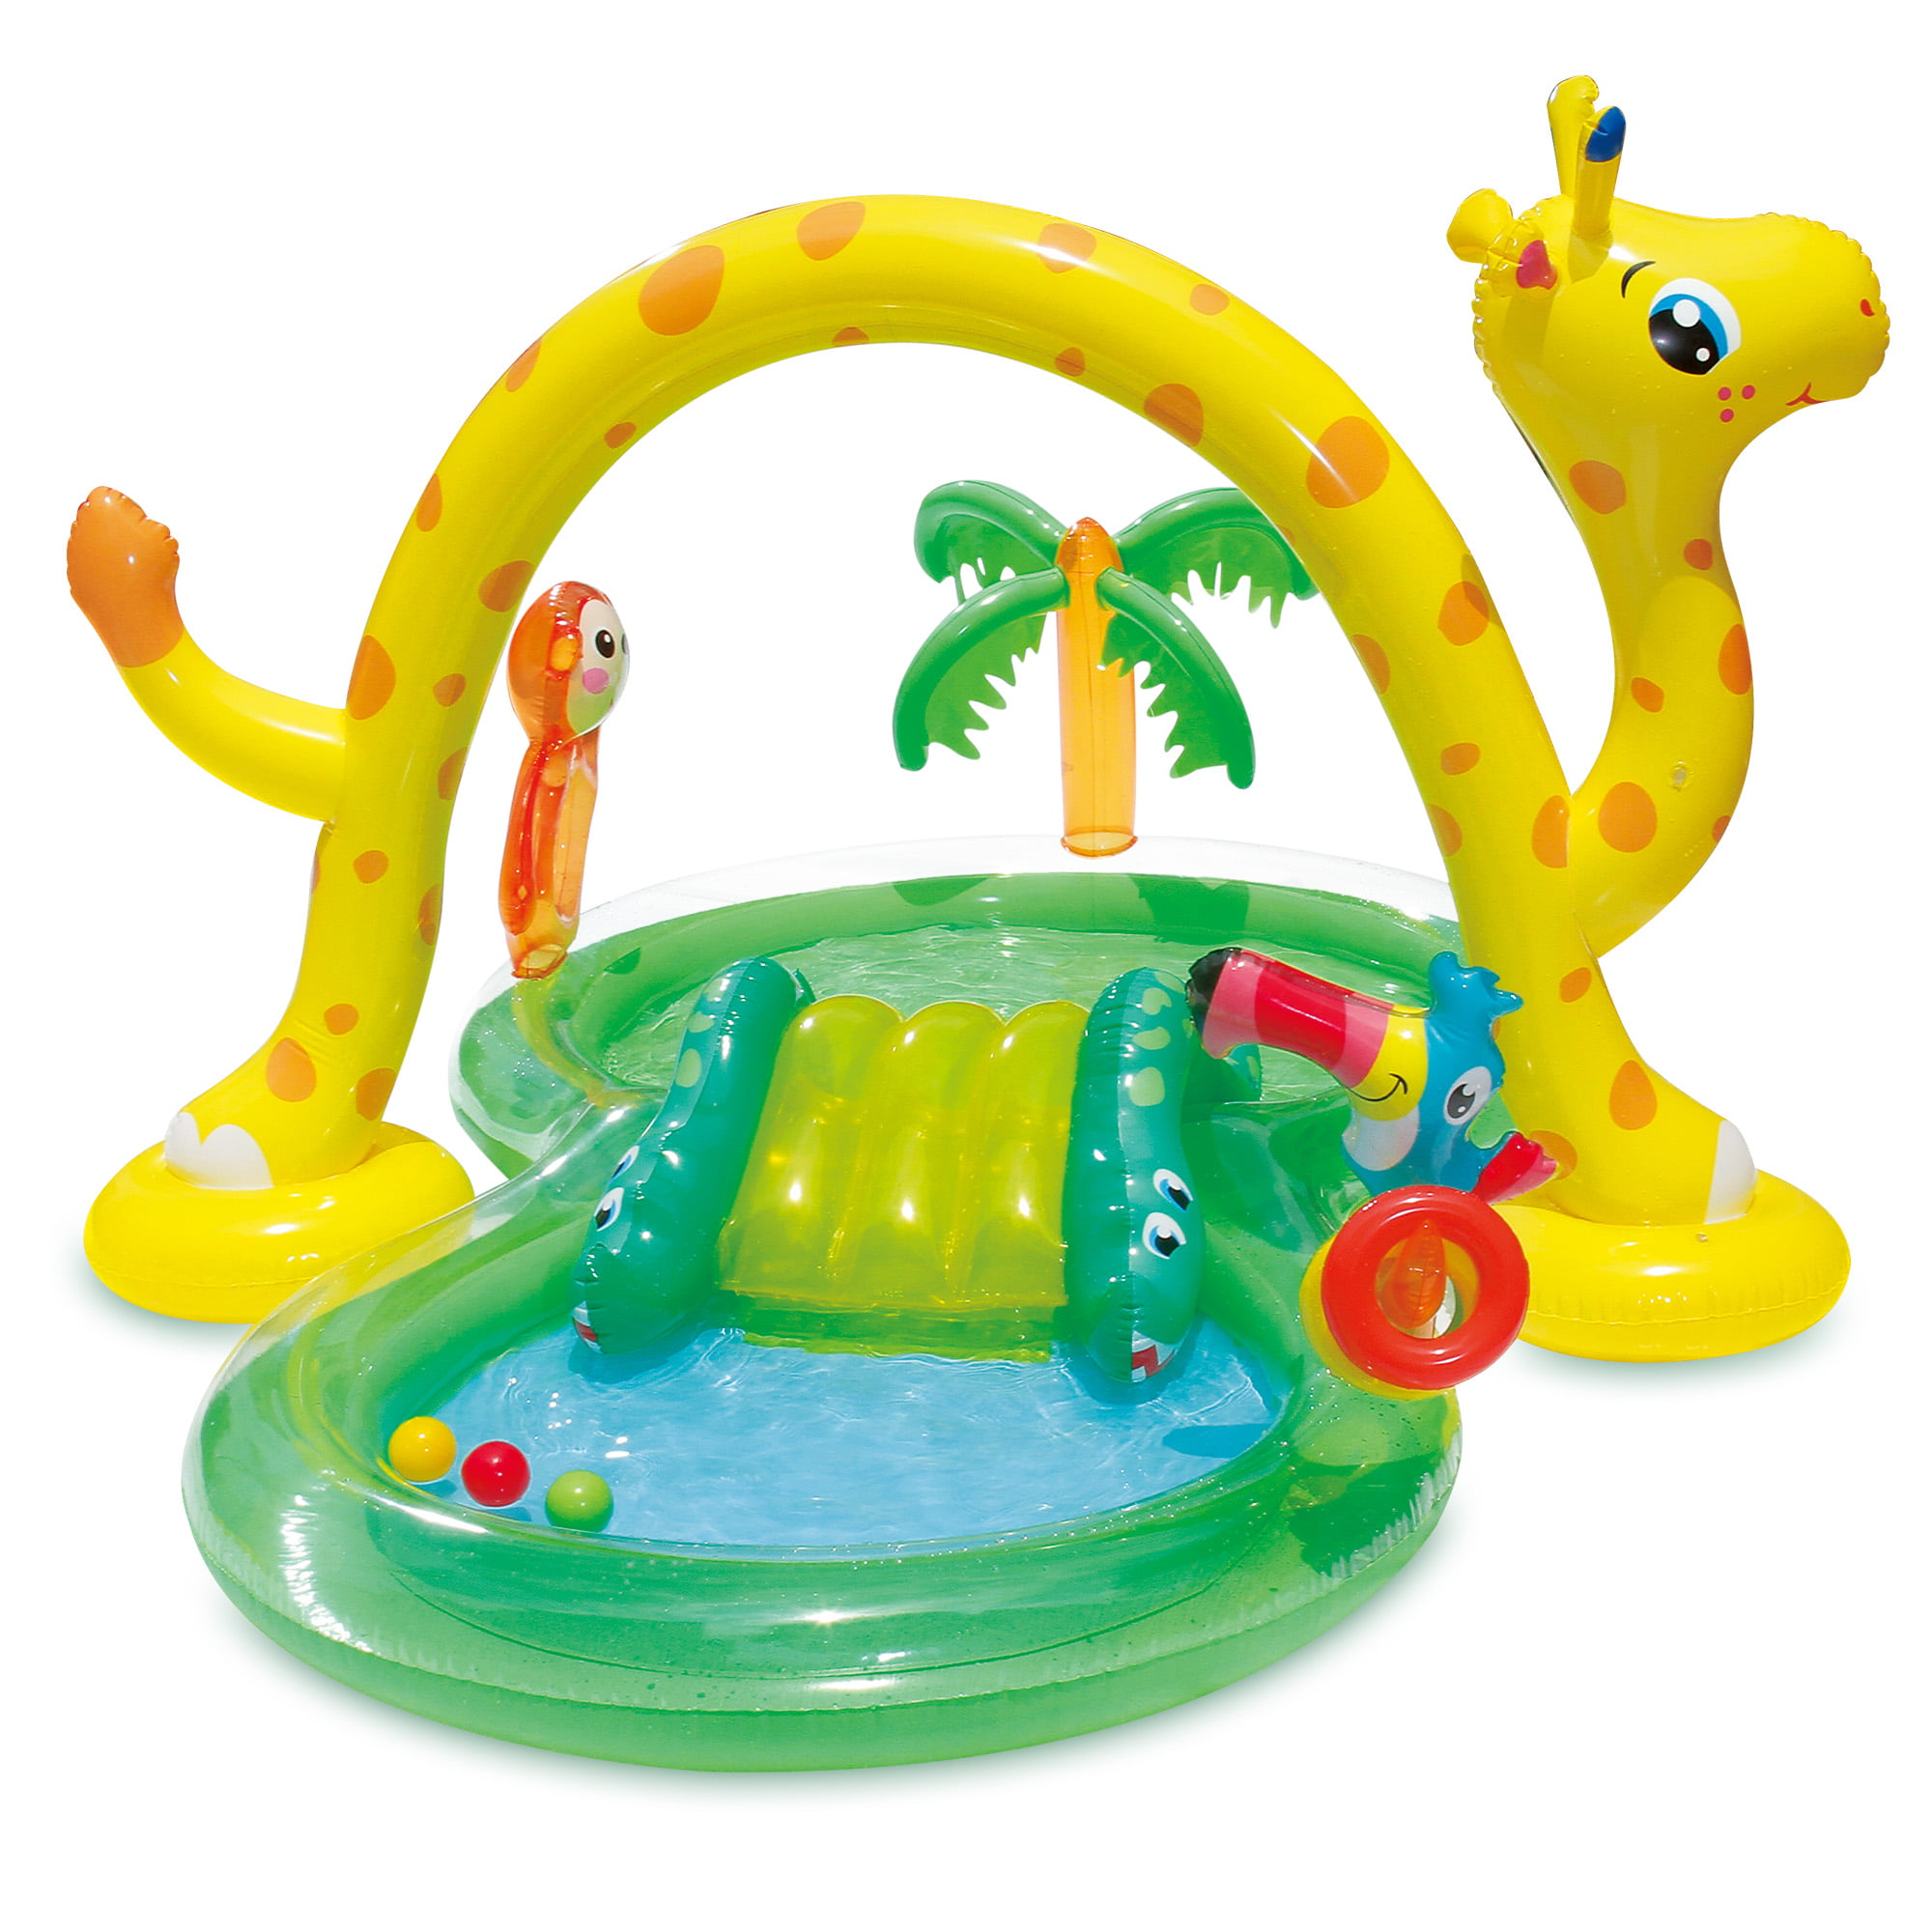 Banzai Spa Party Play Center Kids Inflatable Swimming Pool Canopy Water Jets HTF 